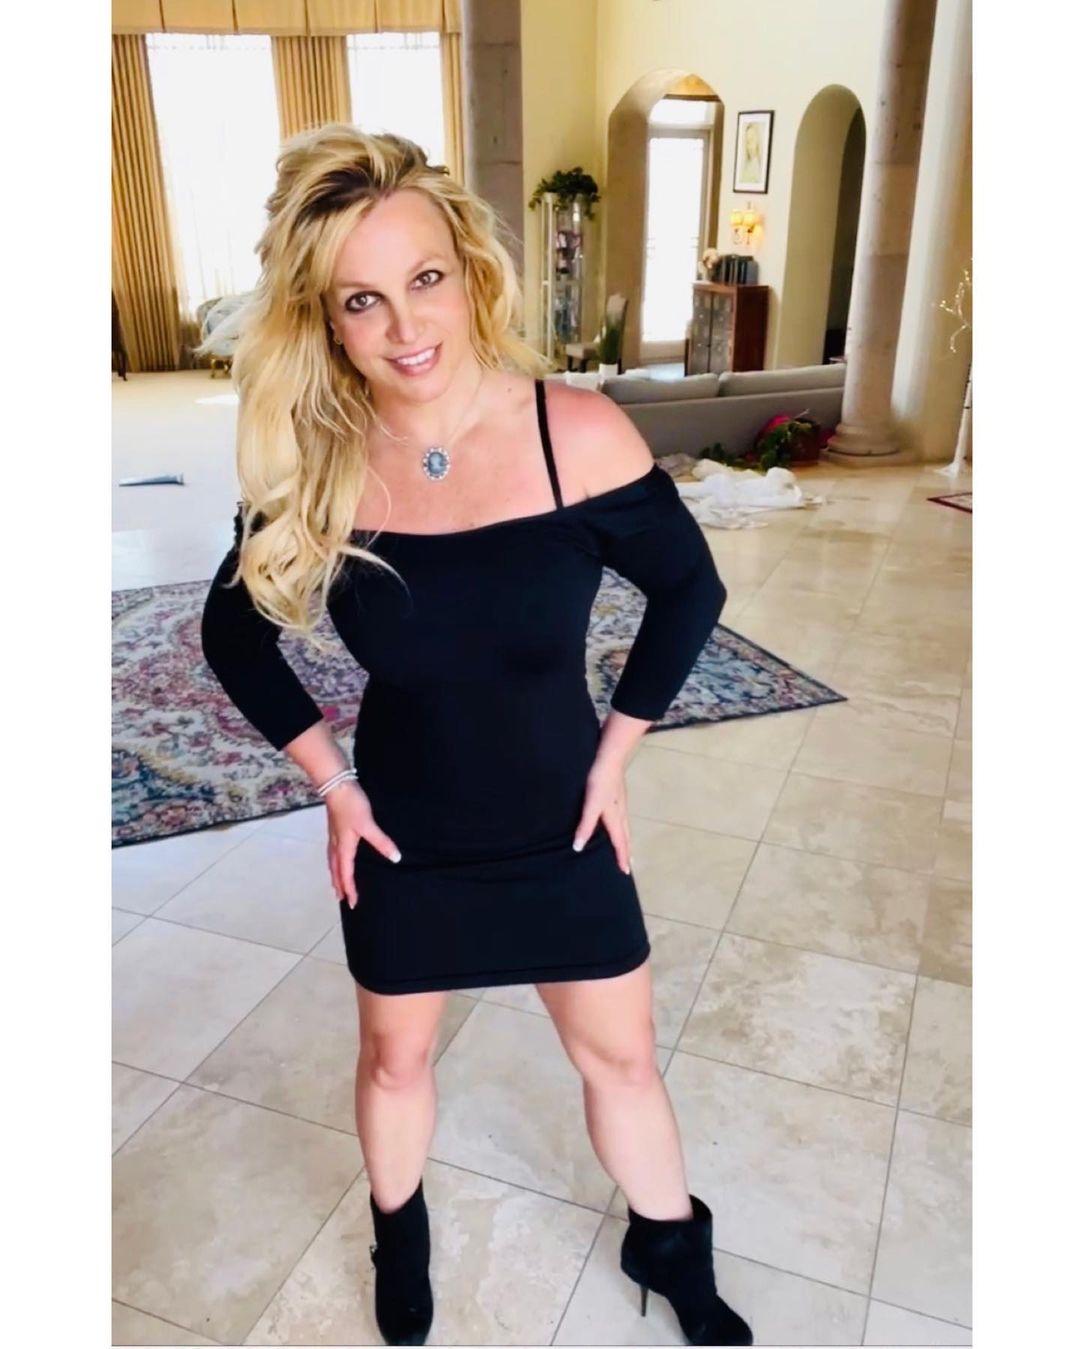 Britney Spears enjoys Vegas before clarifying not against therapy